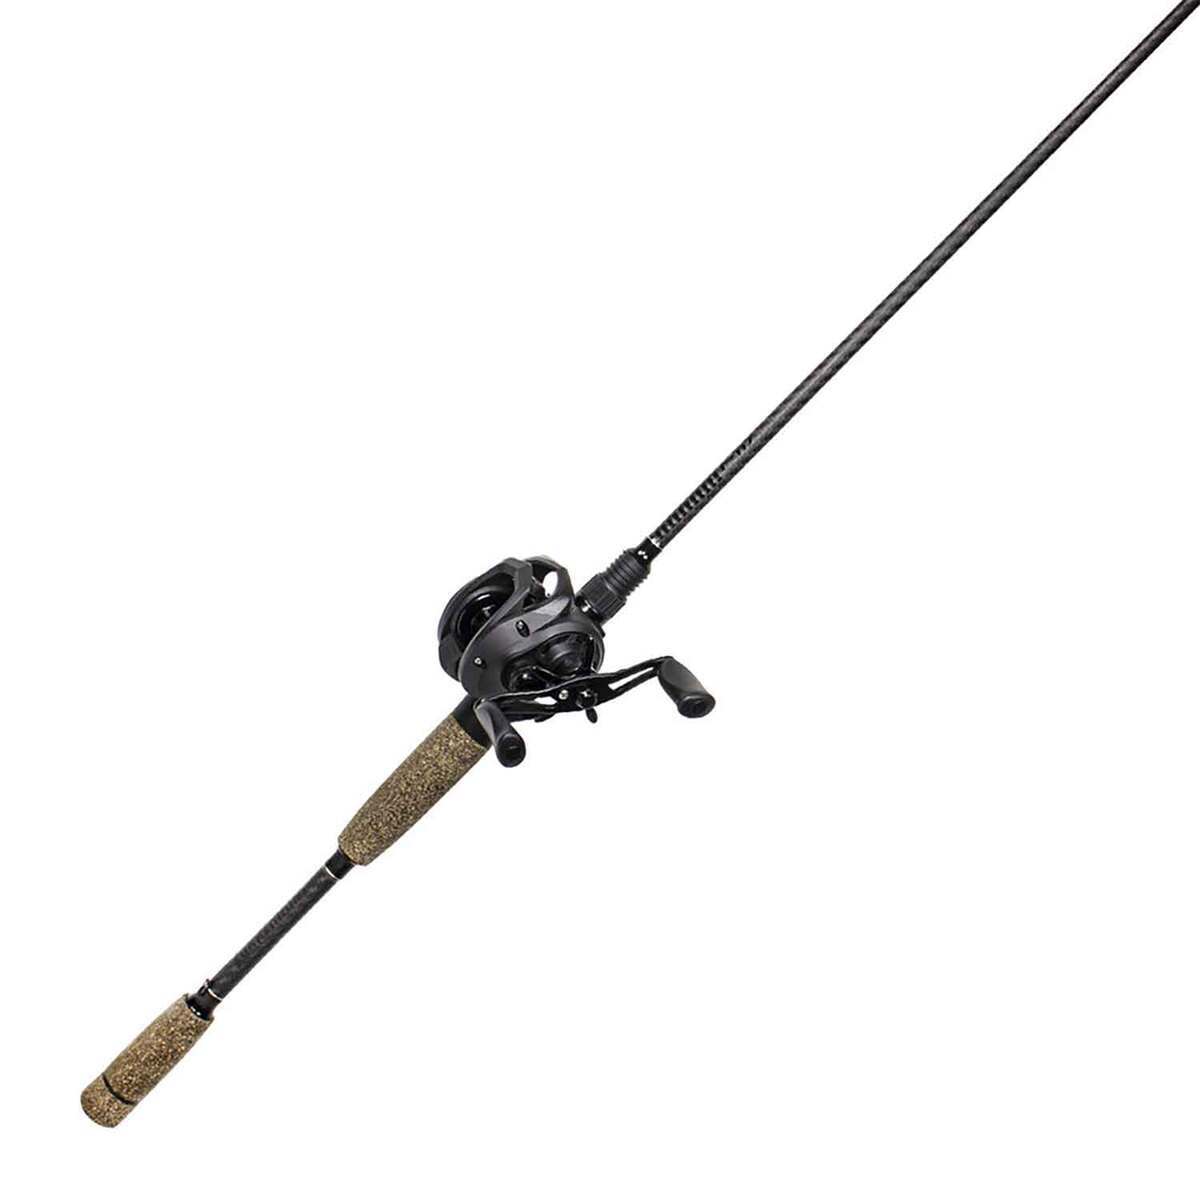 Tailored Tackle Tailored Tackle Bass Fishing Rod and Reel Baitcasting Combo  7 Ft Medium Heavy 2-Piece Baitcasting Rod 7 Ball Bearings 6.3:1 Gear Ratio Right  Handed Baitcaster Reel Fishing Pole : 